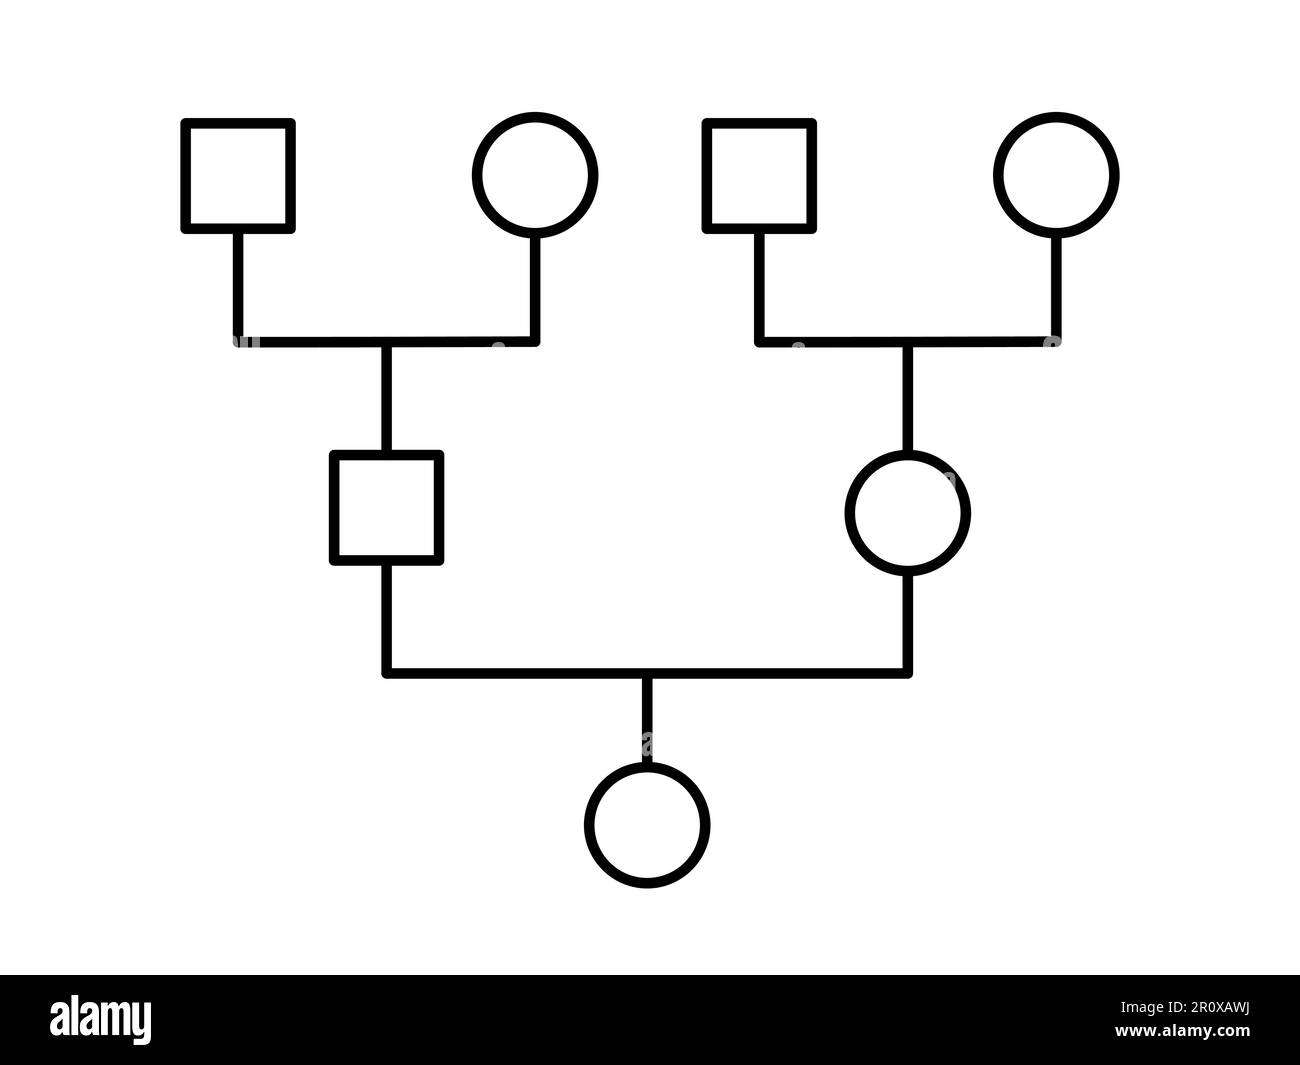 Genogram. Family tree chart. Simple diagram showing family members. Genealogy tree structure. Can be used for ancestry heritage research. Vector Stock Vector